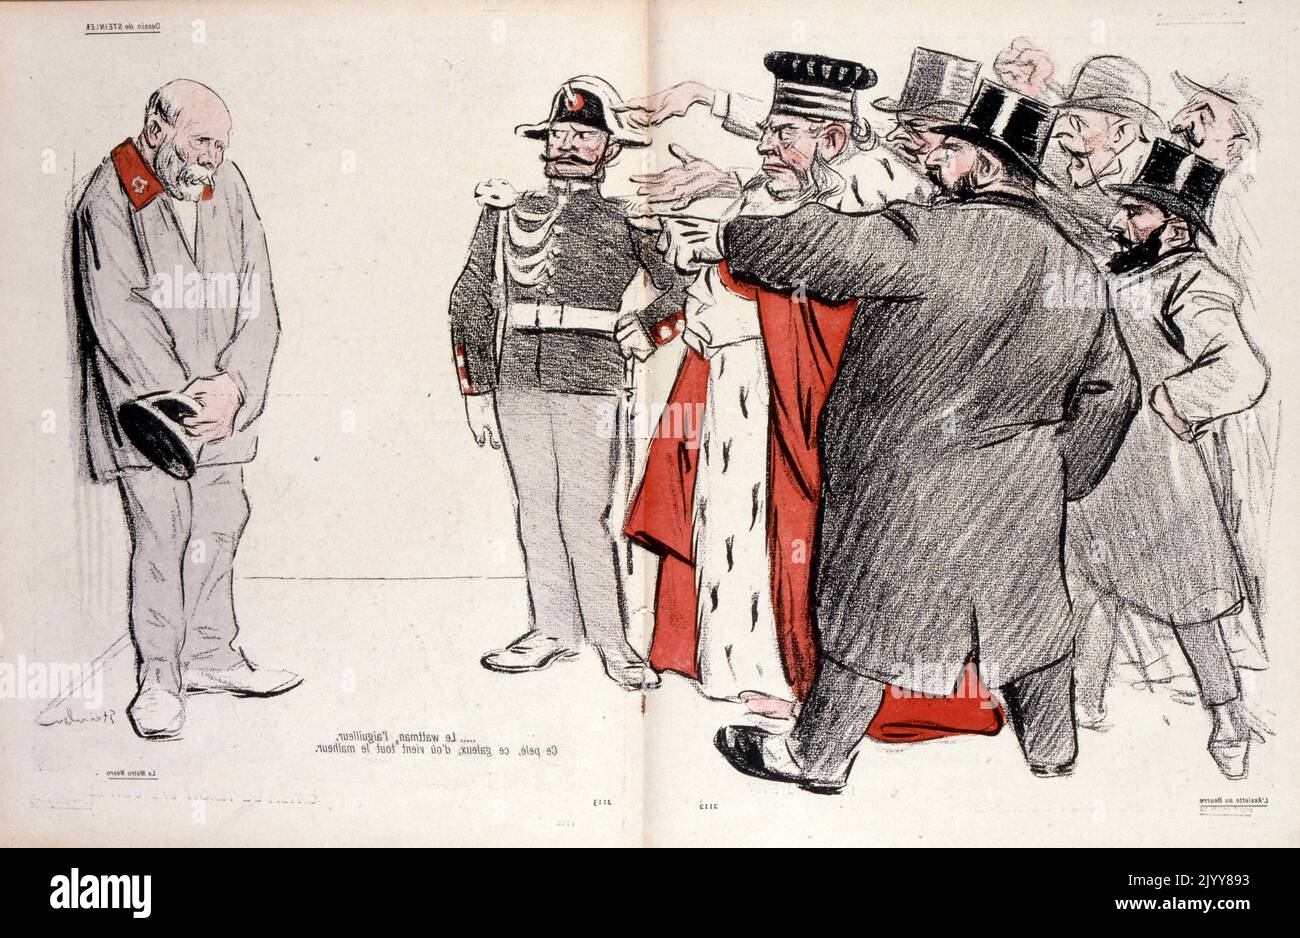 In L'Assiette au Beurre satirical magazine; colour drawing of a man cowering in the corner while the king and his entourage point angrily at him Stock Photo